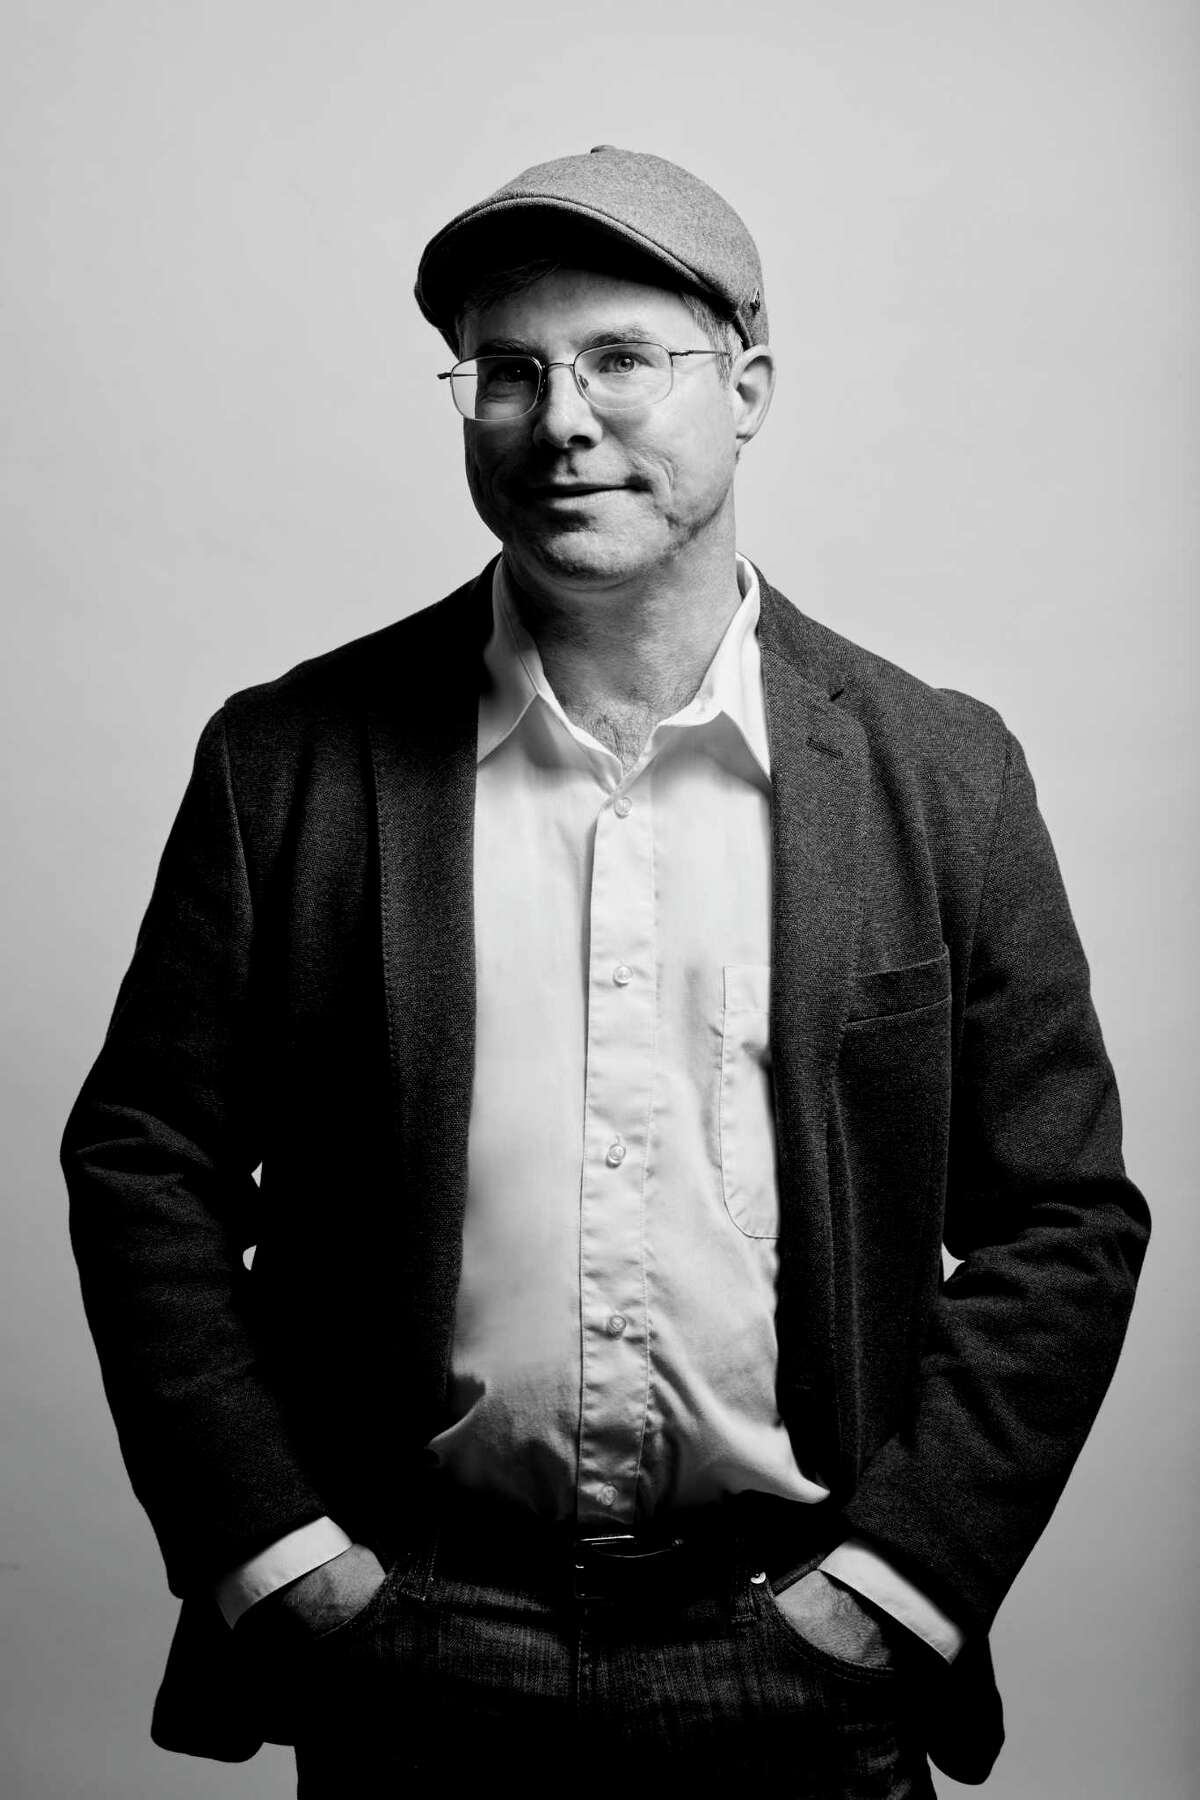 Author Andy Weir